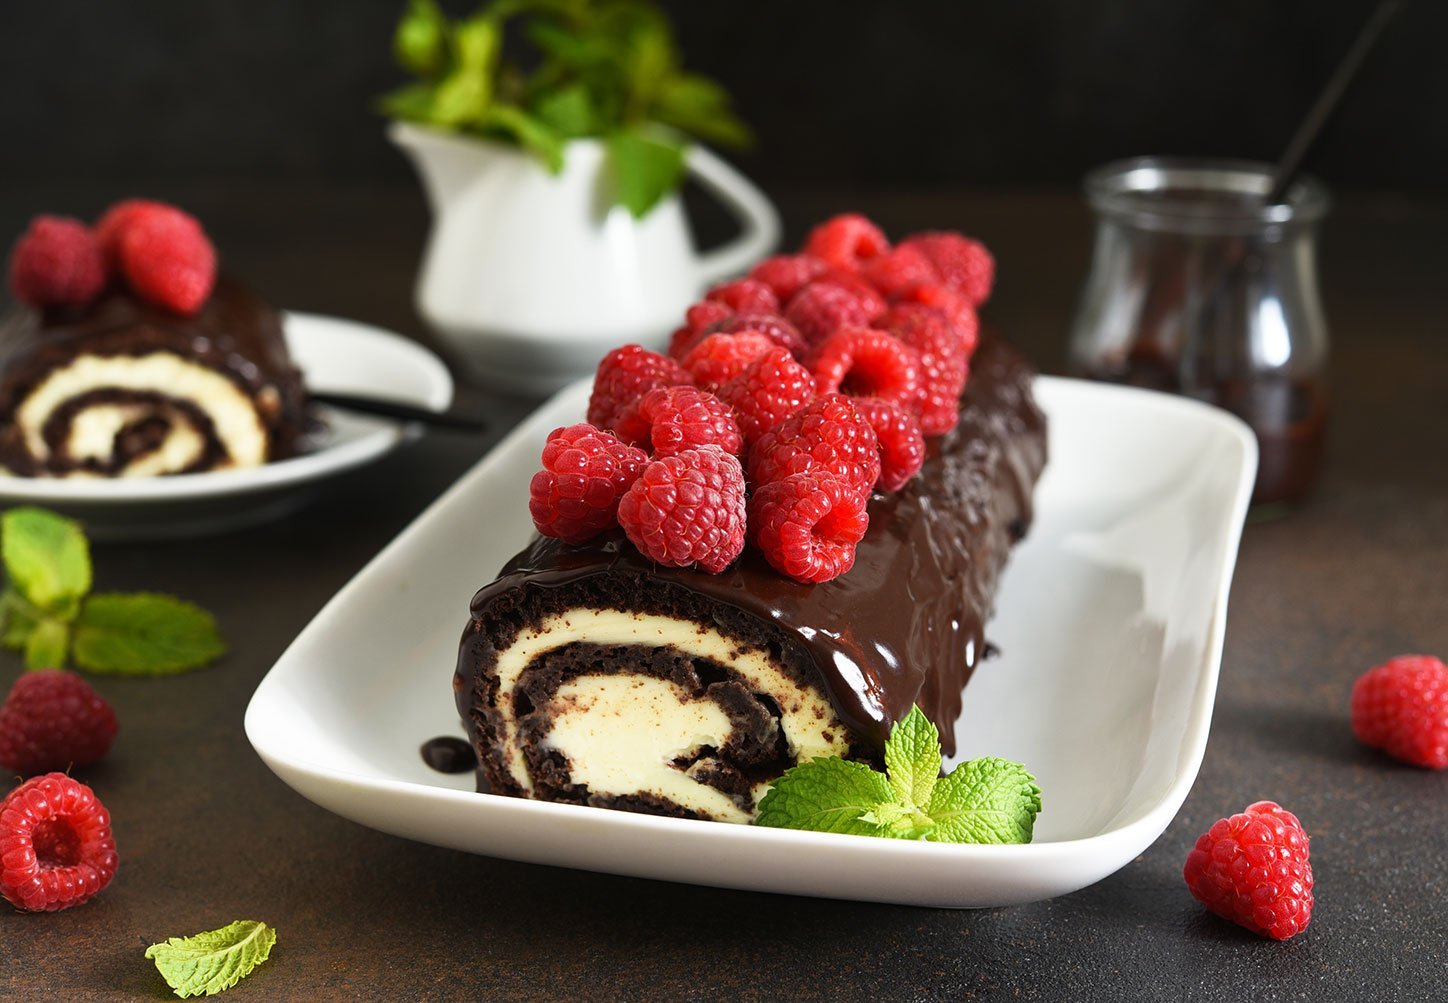 Chocolate Roll With Cream Cheese And Raspberries, With A Cup Of Coffee On A Dark Background.